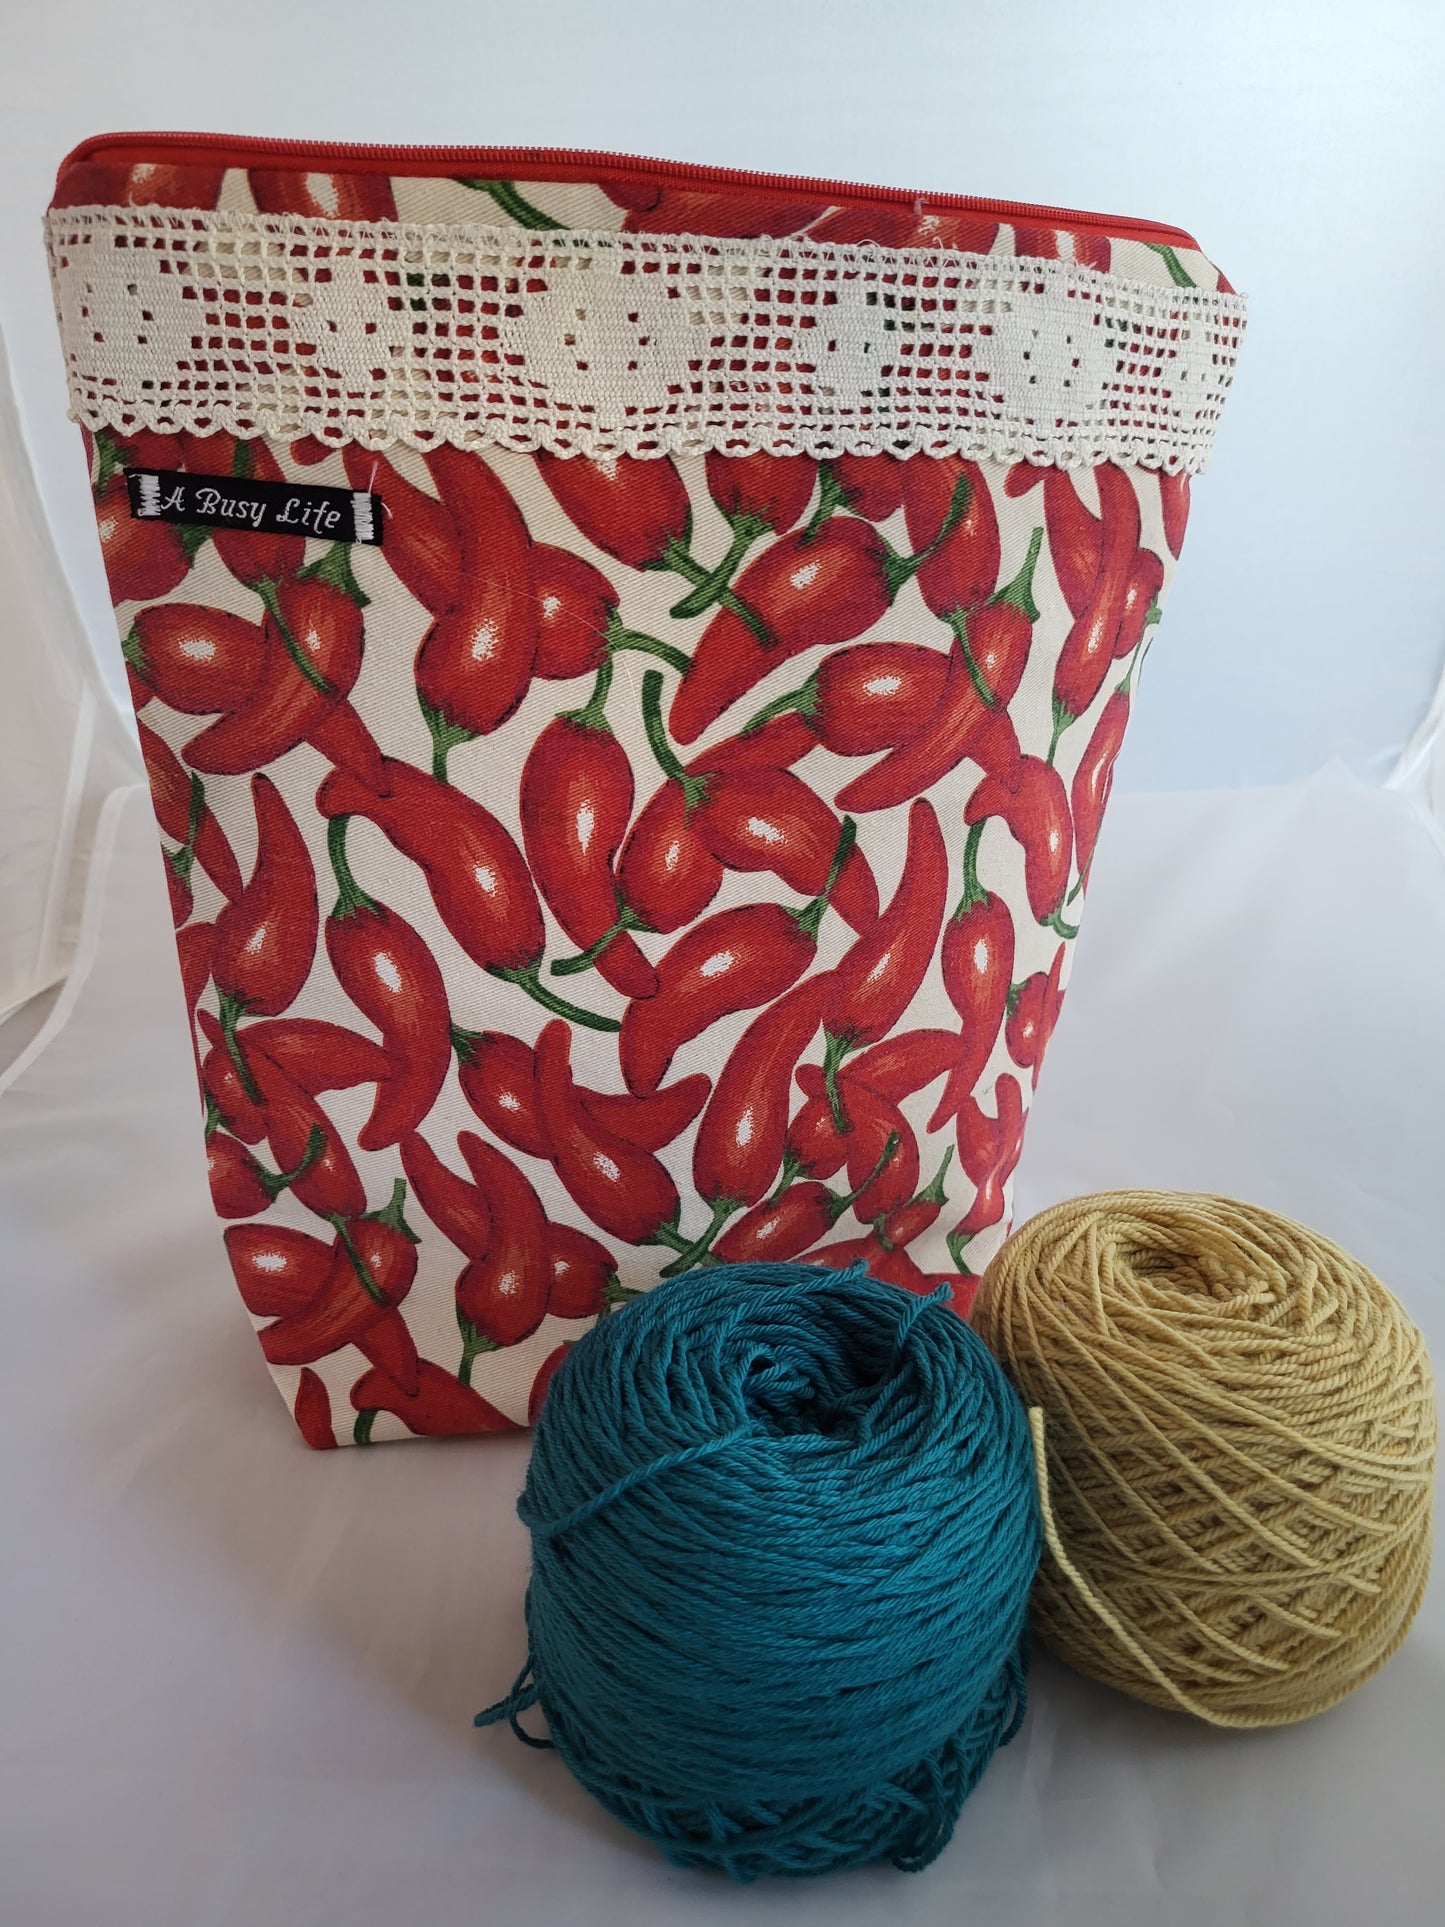 Hot Pepper and Lace Project Bag, Zippered Project Bag, Hot Pepper project bag,  project bag,  Storage bag